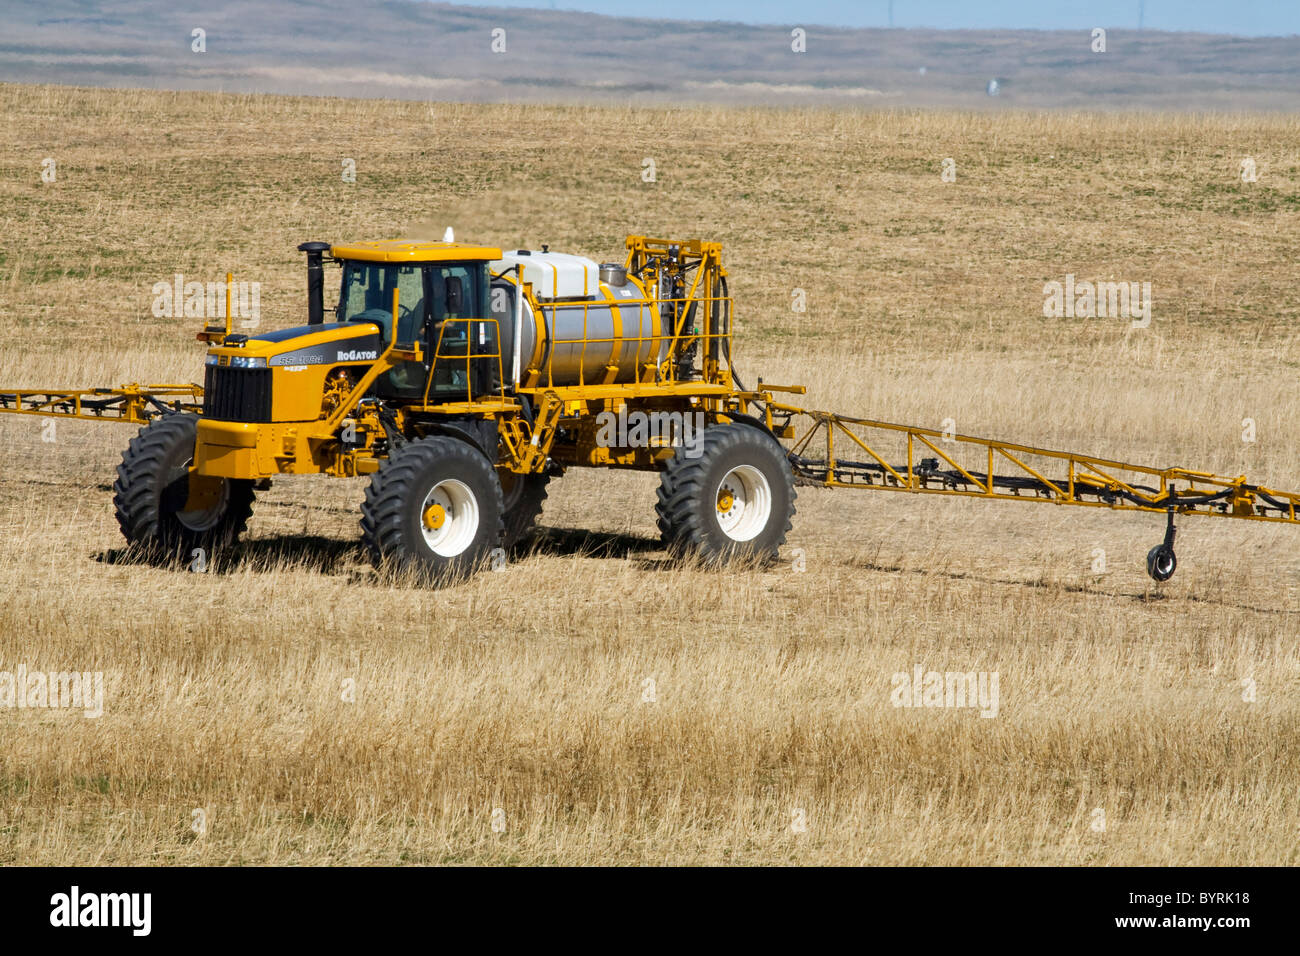 A RoGator applies herbicide to a dryland grain field in Spring prior to planting a new grain crop / Alberta, Canada. Stock Photo